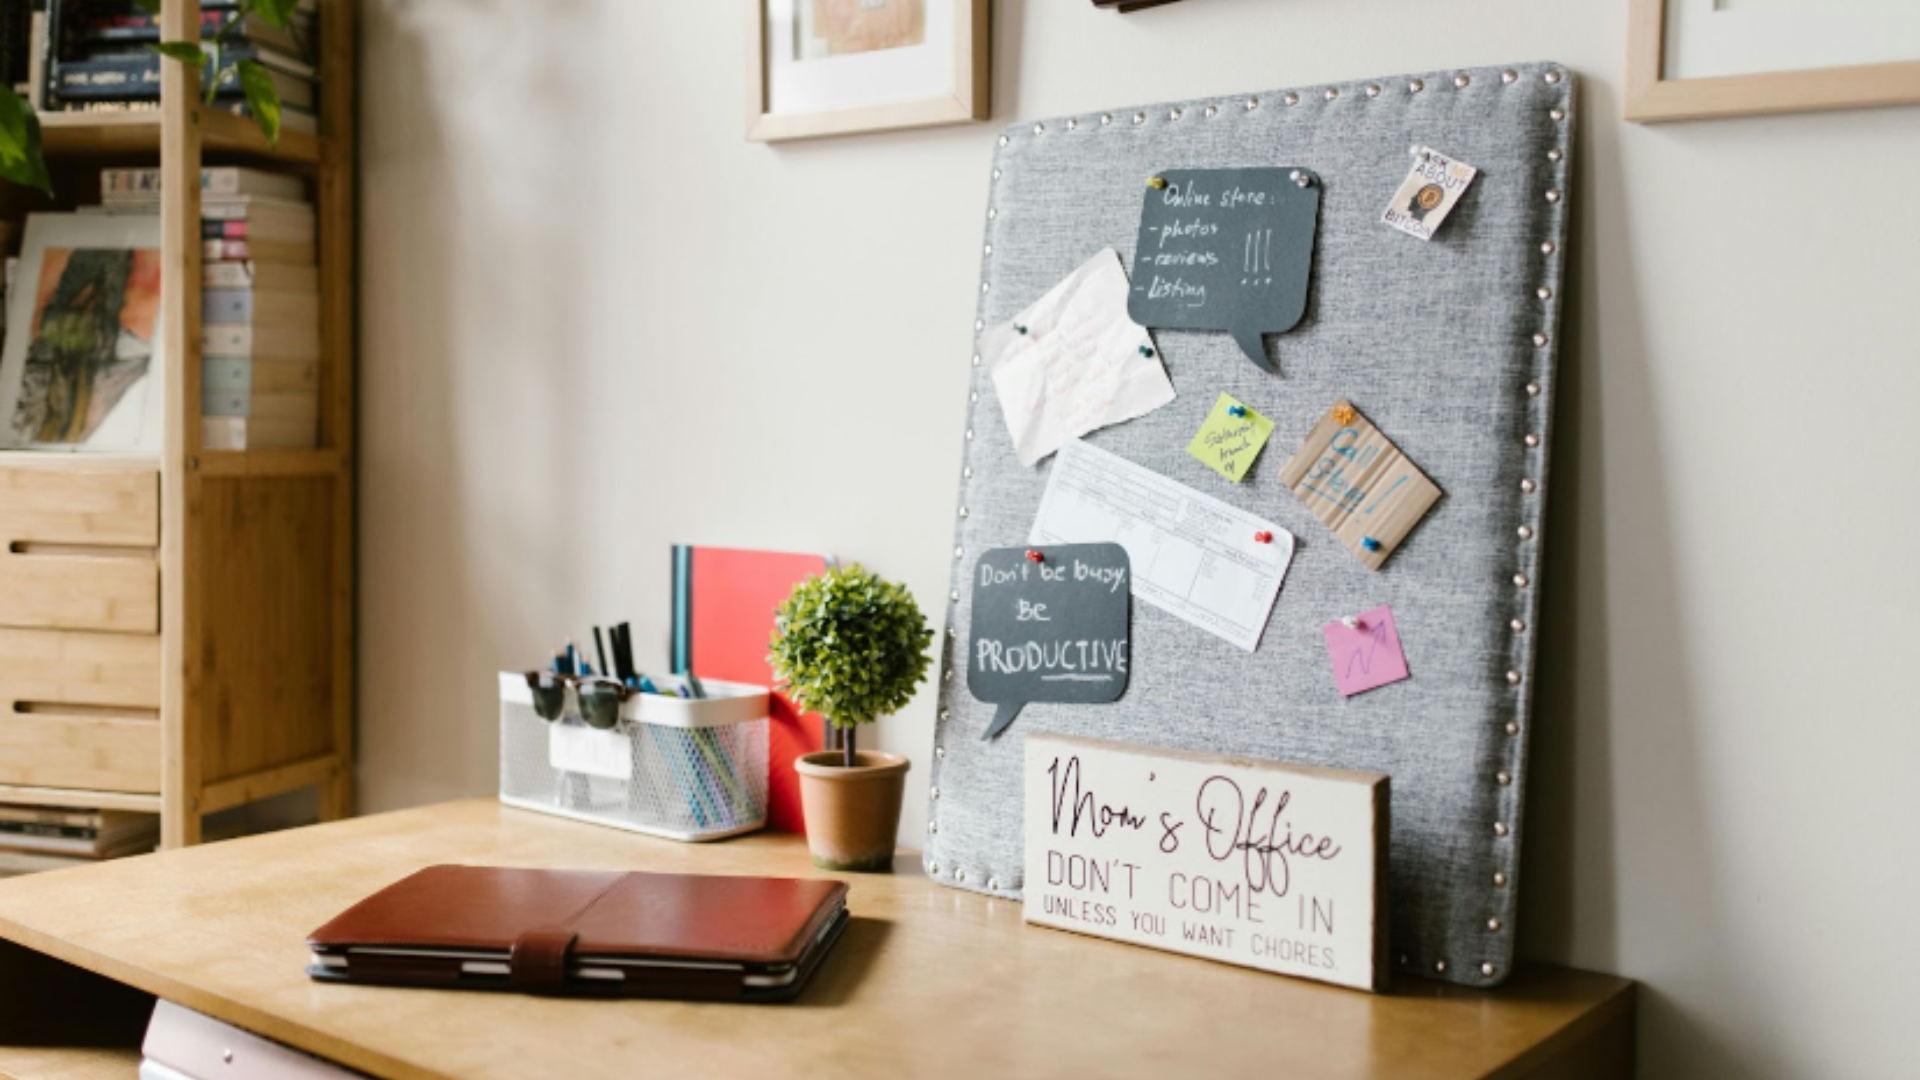 At-home office set up with corkboard of reminders and signs: art of multi-tasking